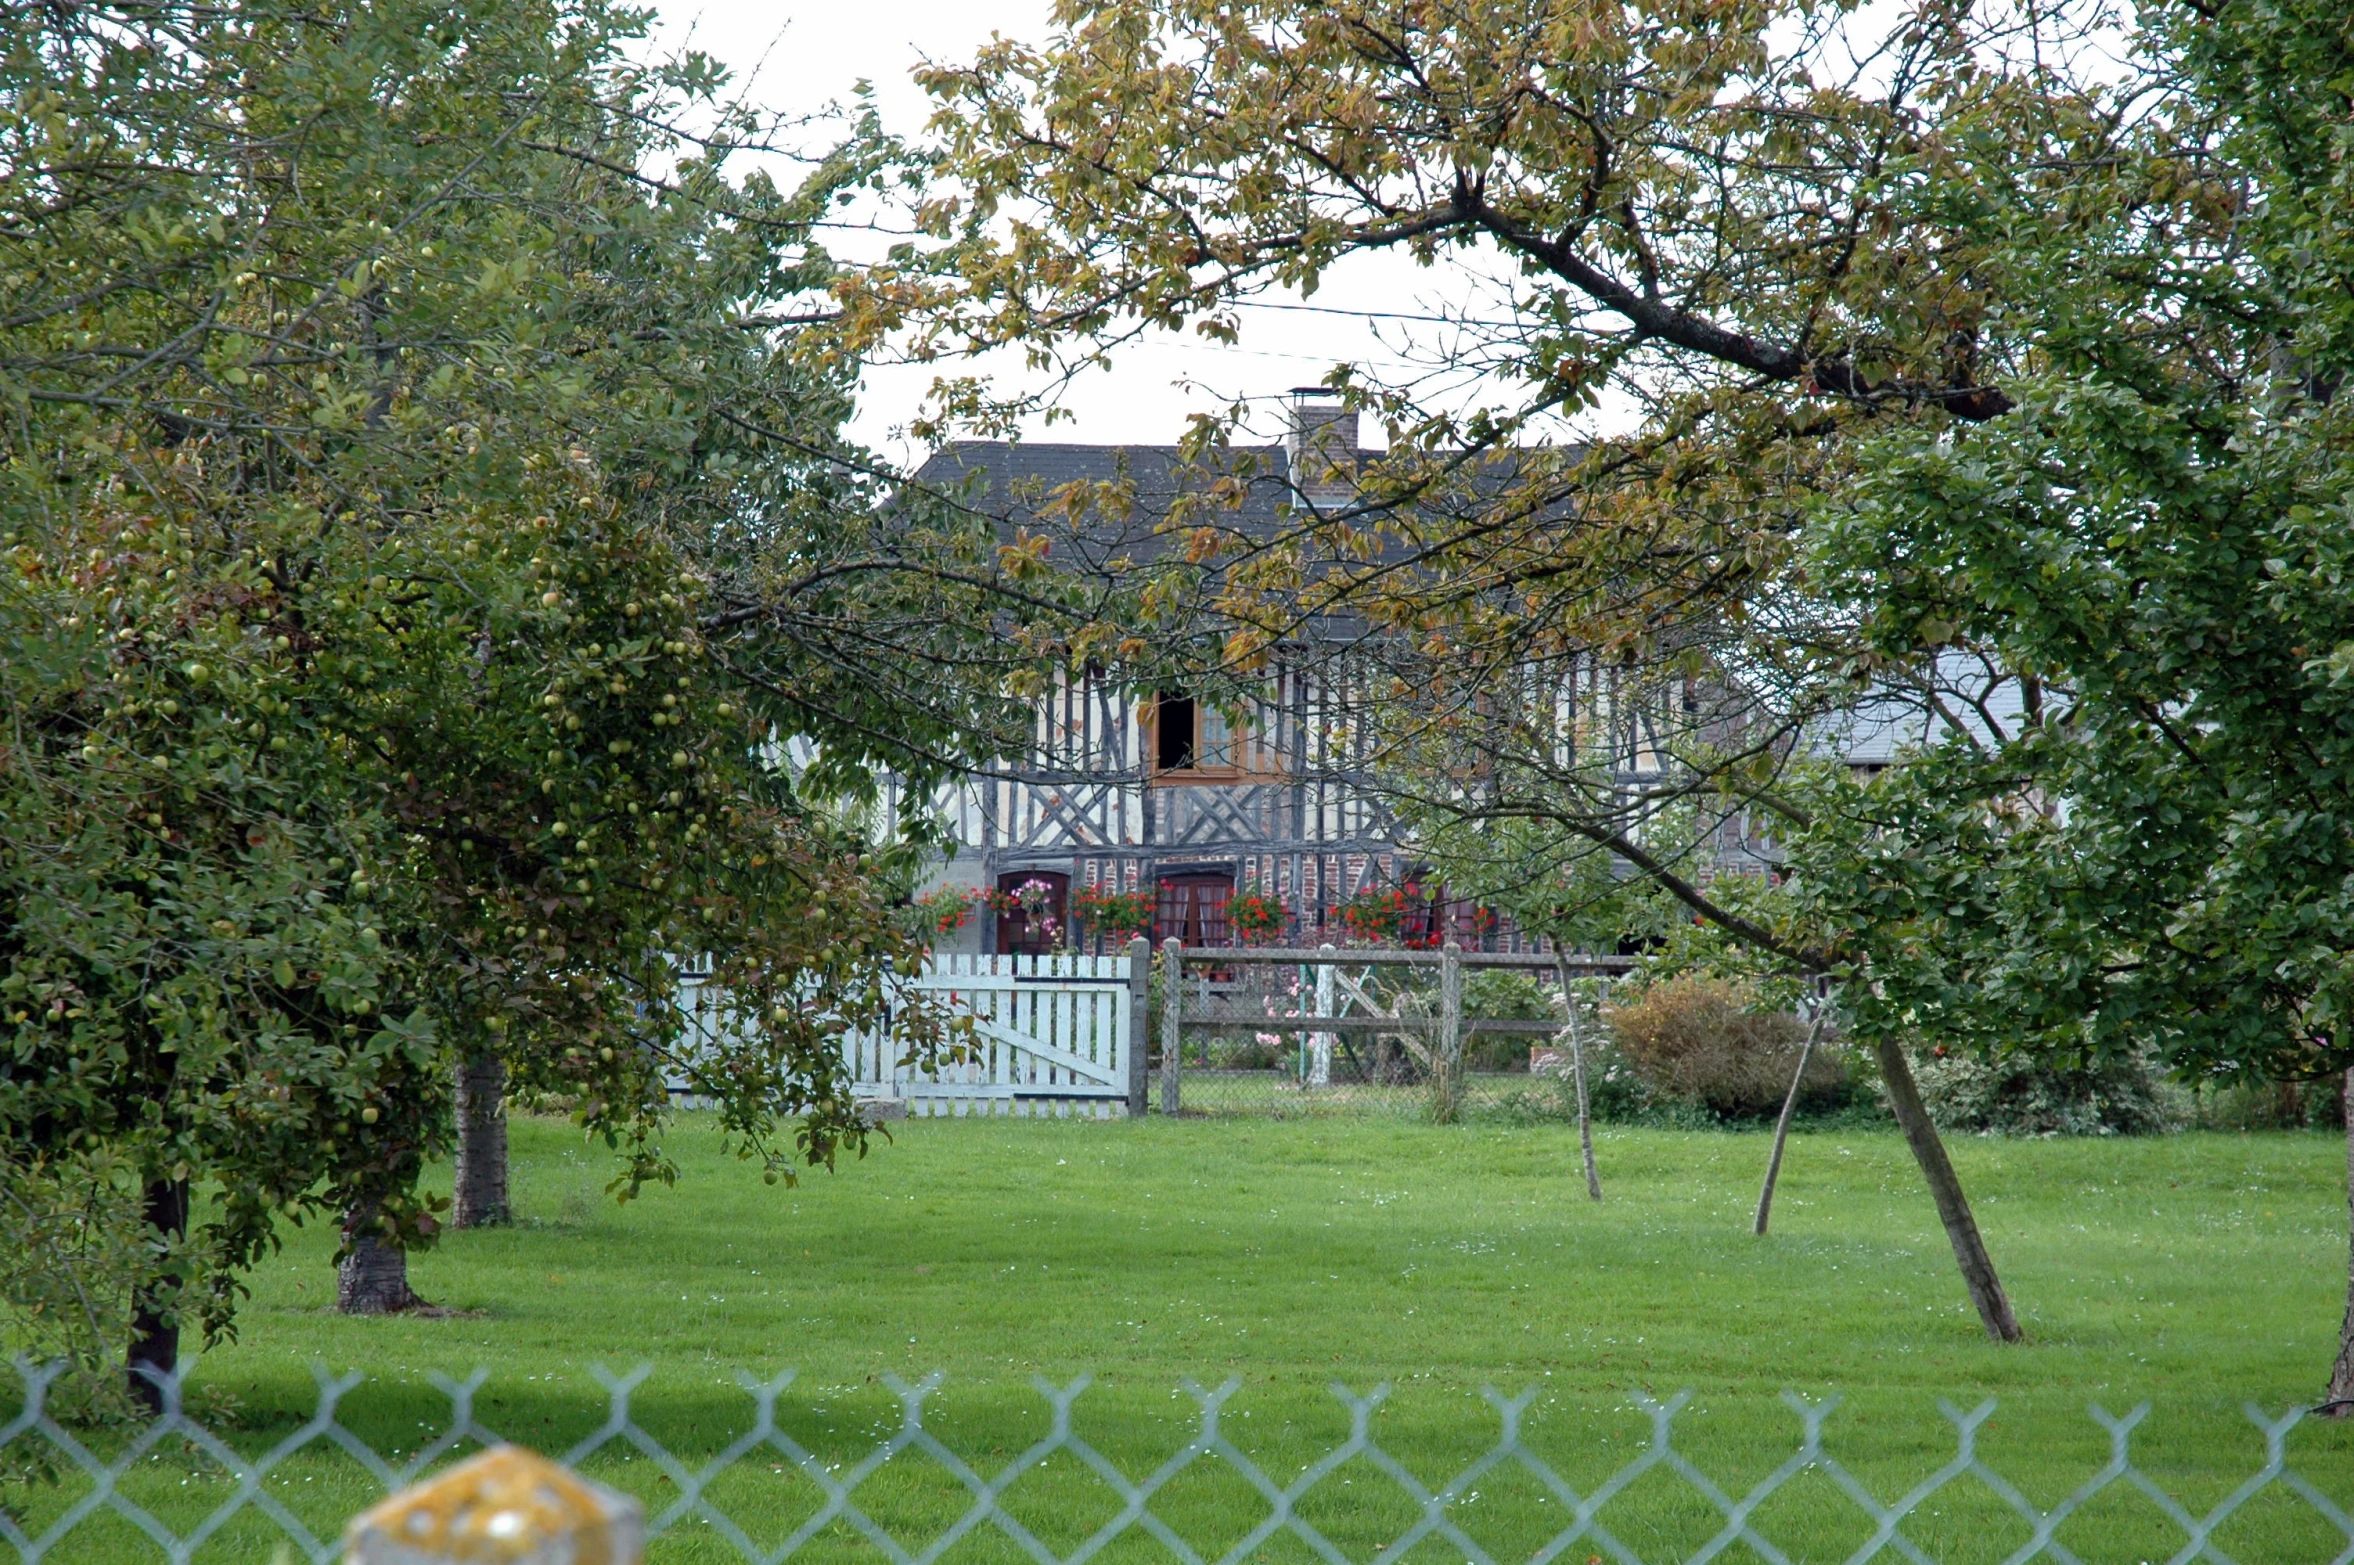 the view from across a large fence of a house in the distance